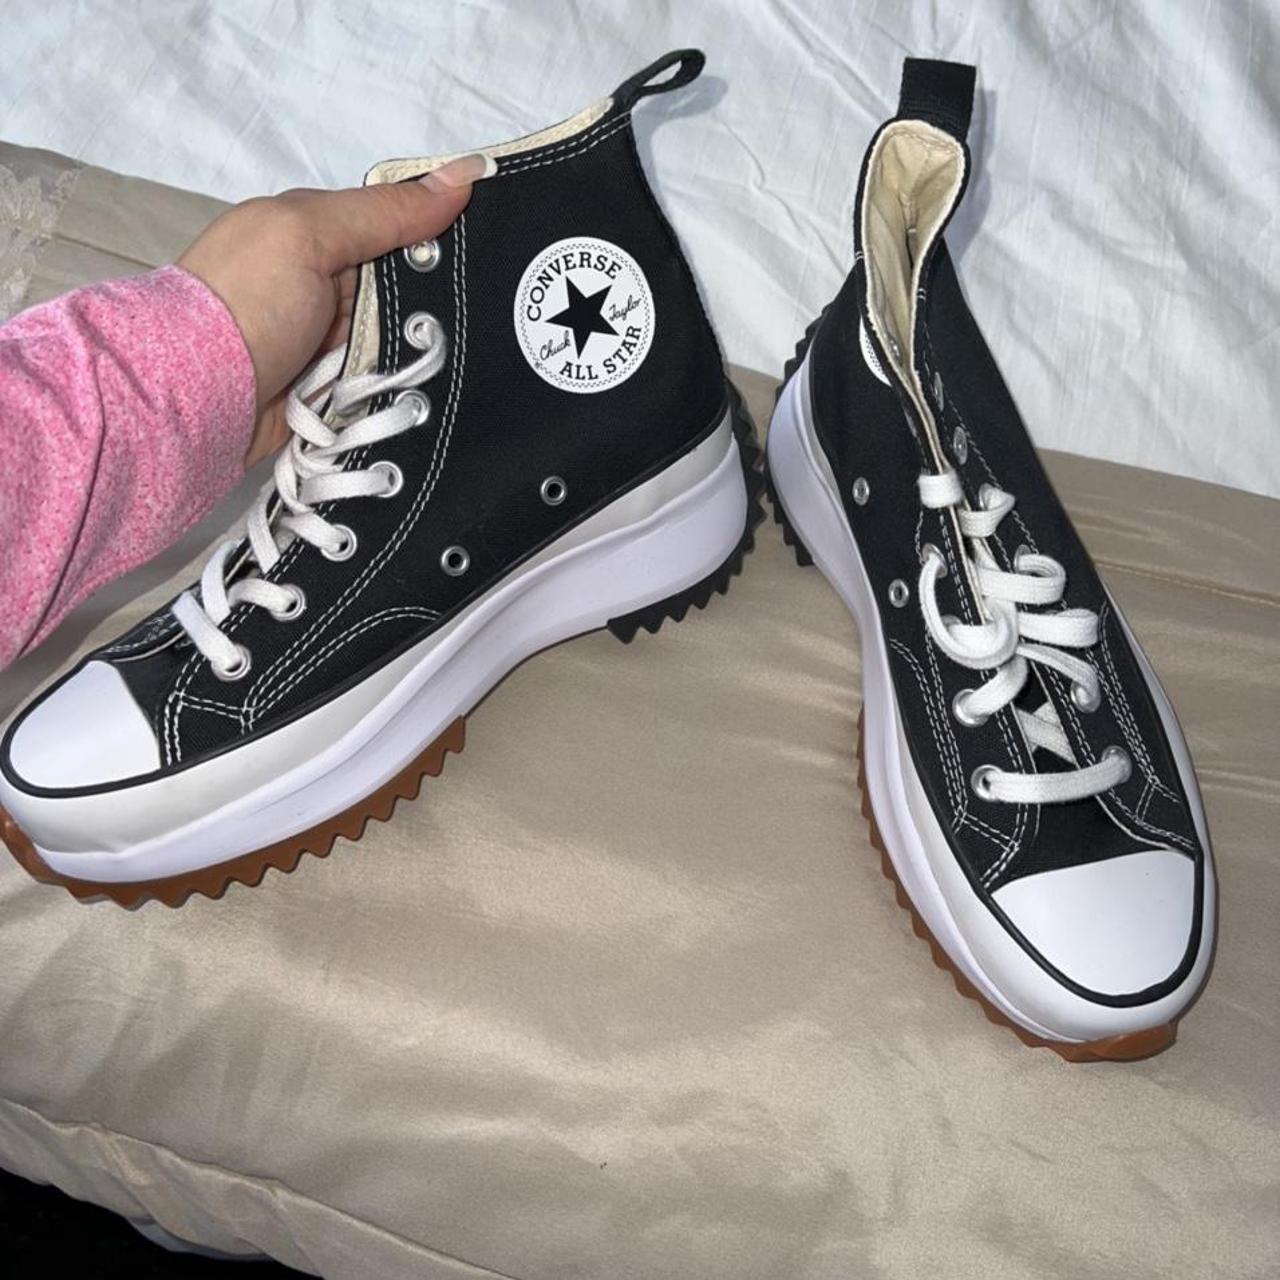 Run star hike chunky converse trainers size 5 never... - Depop